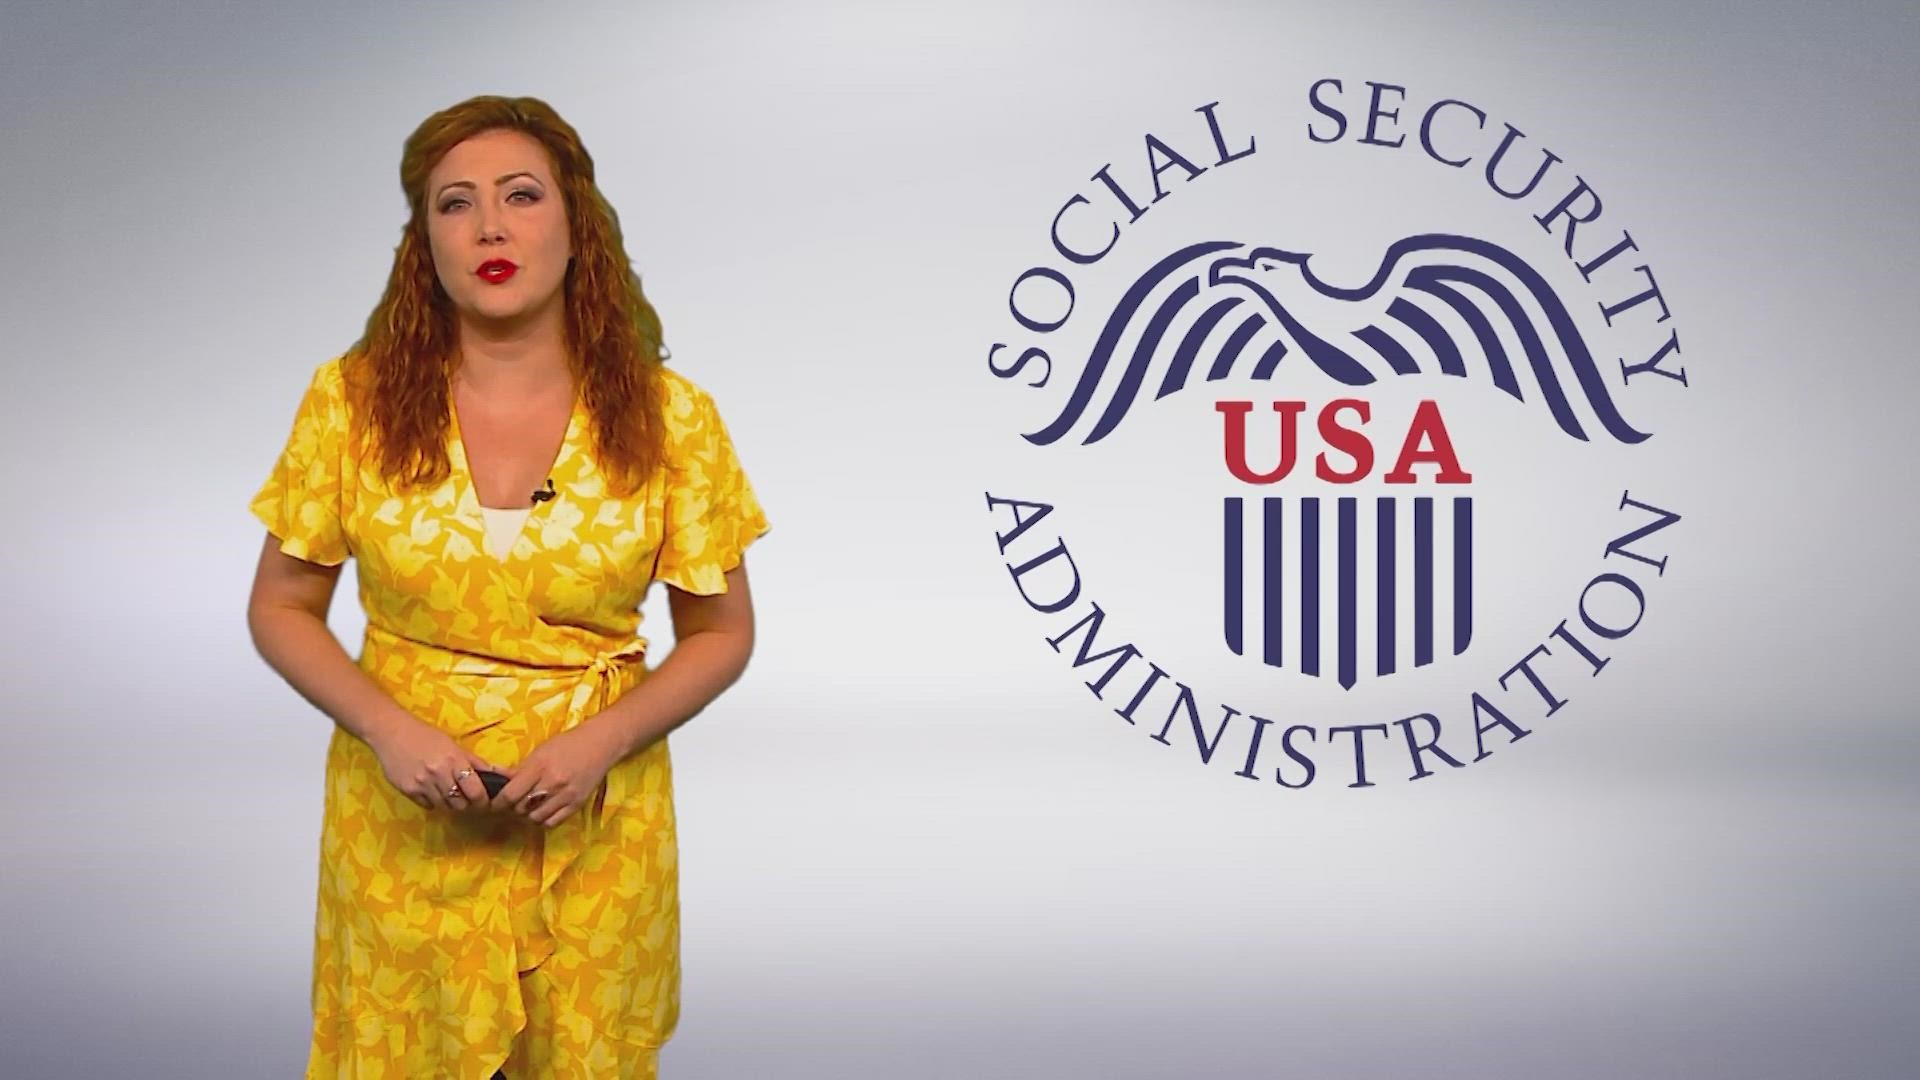 A new report from the Social Security Administration predicts funds will run out sooner than previously expected and the pandemic is to blame.